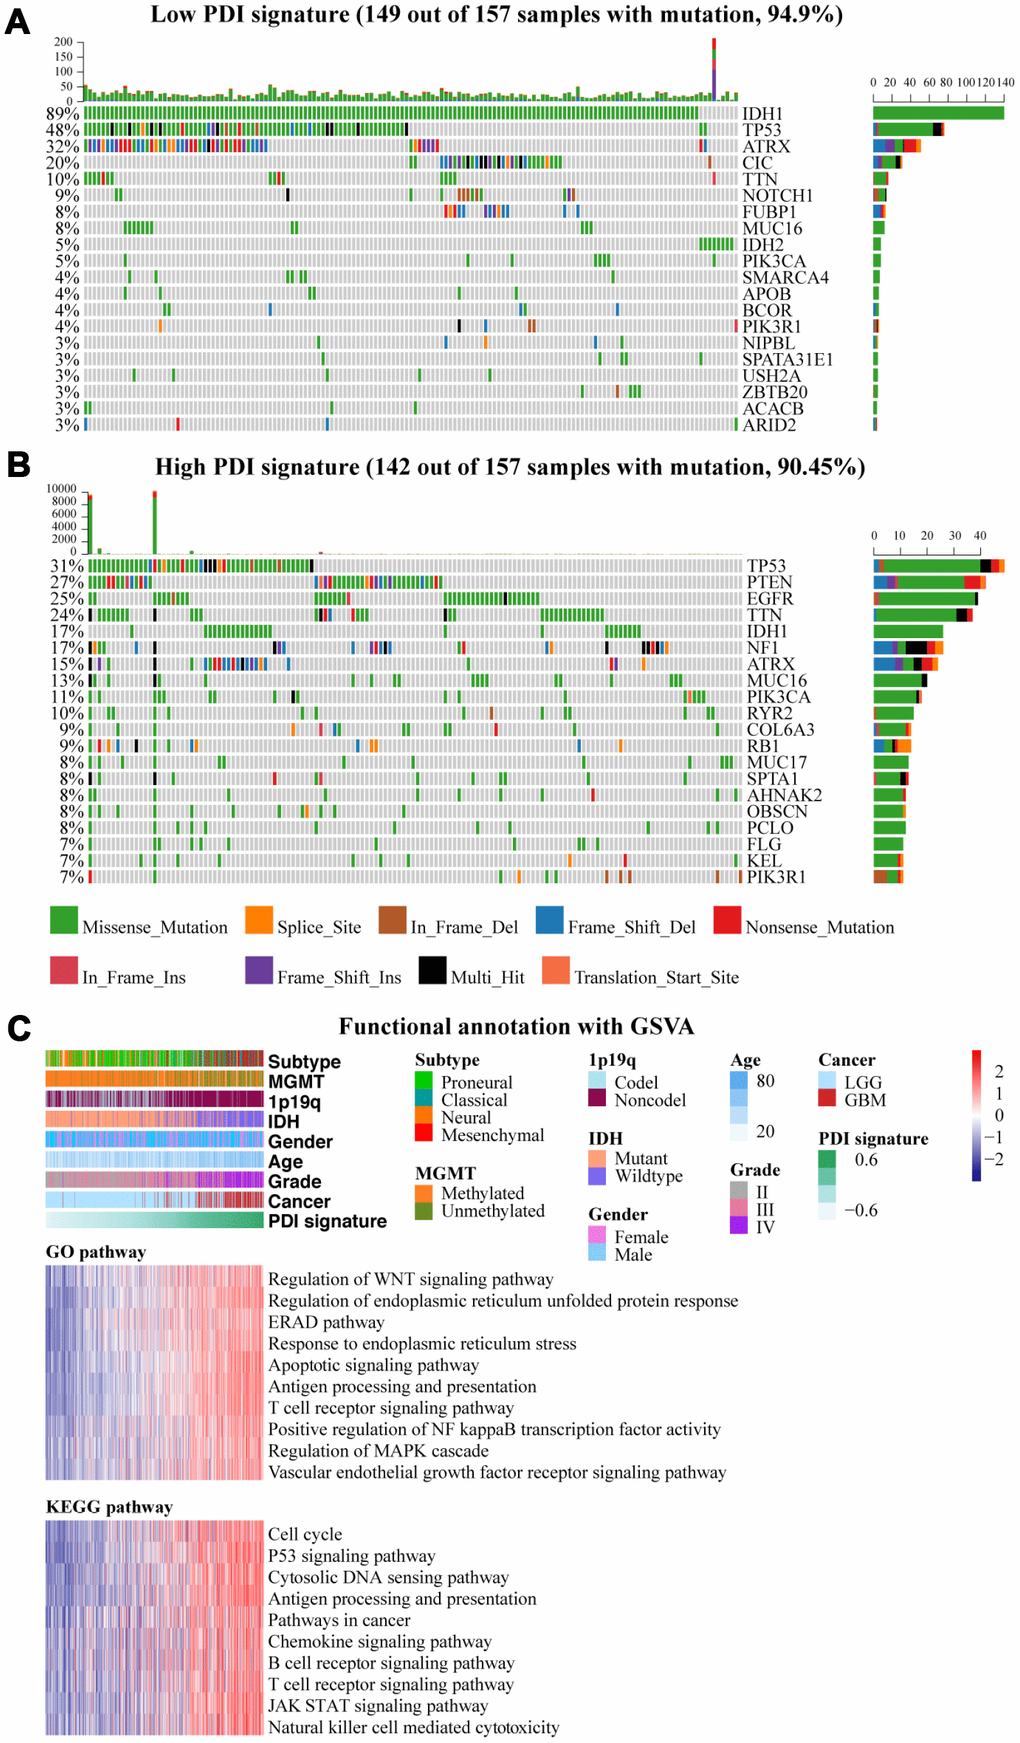 (A, B) Genetic alteration profiles associated with PDI signature in TCGA and CGGA datasets. Oncoprint depicts the distribution of the top 20 genes with the highest mutation frequency in each glioma group (low PDI signature vs high PDI signature). (C) Functional annotation of PDI gene family with PDI signature, including GO and KEGG. The upper one panel shows the distribution of PDI signature and clinical features, and the lower two panels show the gene set enrichment in different pathways analyzed by GSVA package of R. TCGA database as training set and CGGA database as the validation set.